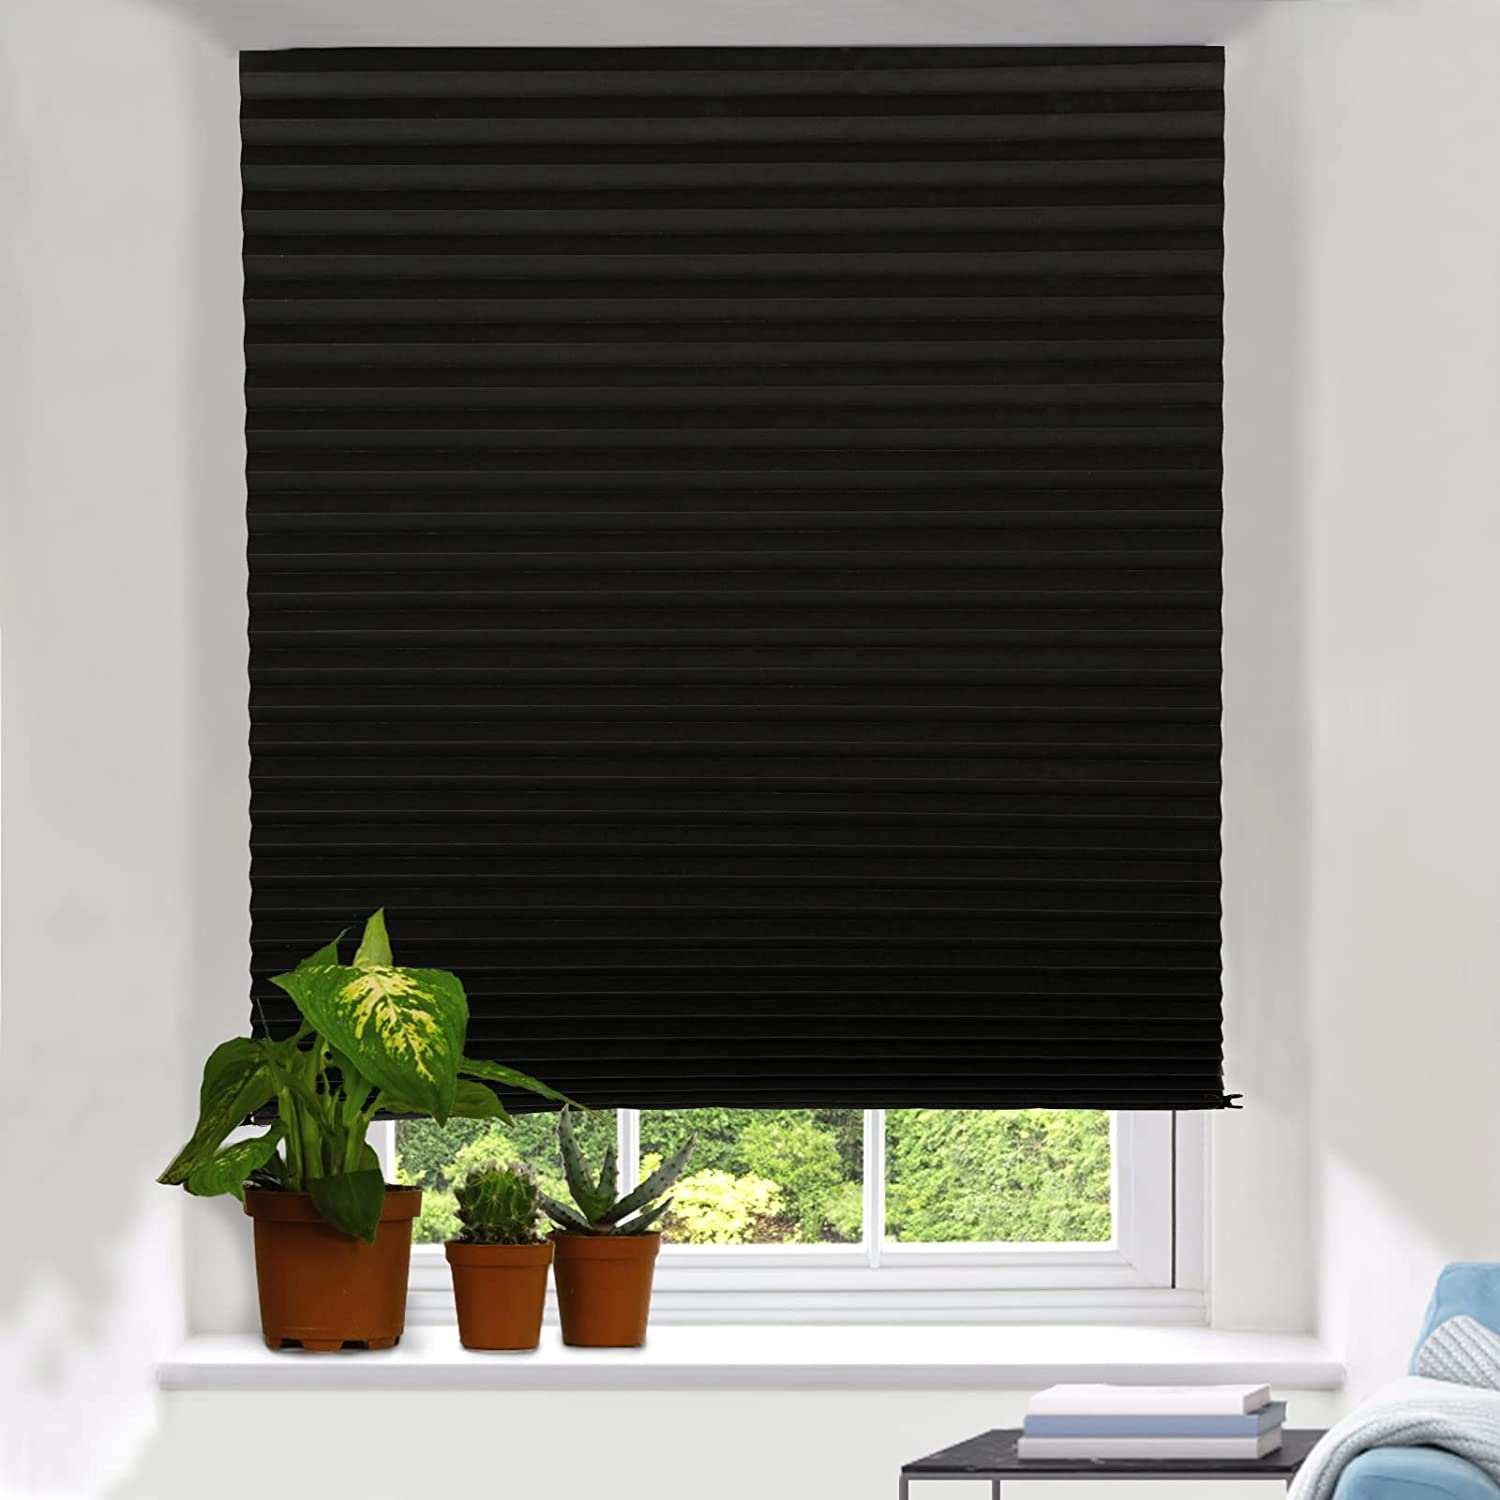 Chiny Dostawca Black Paper Shade, producent Black Paper Shade, hurtownia Black Paper Shade producent